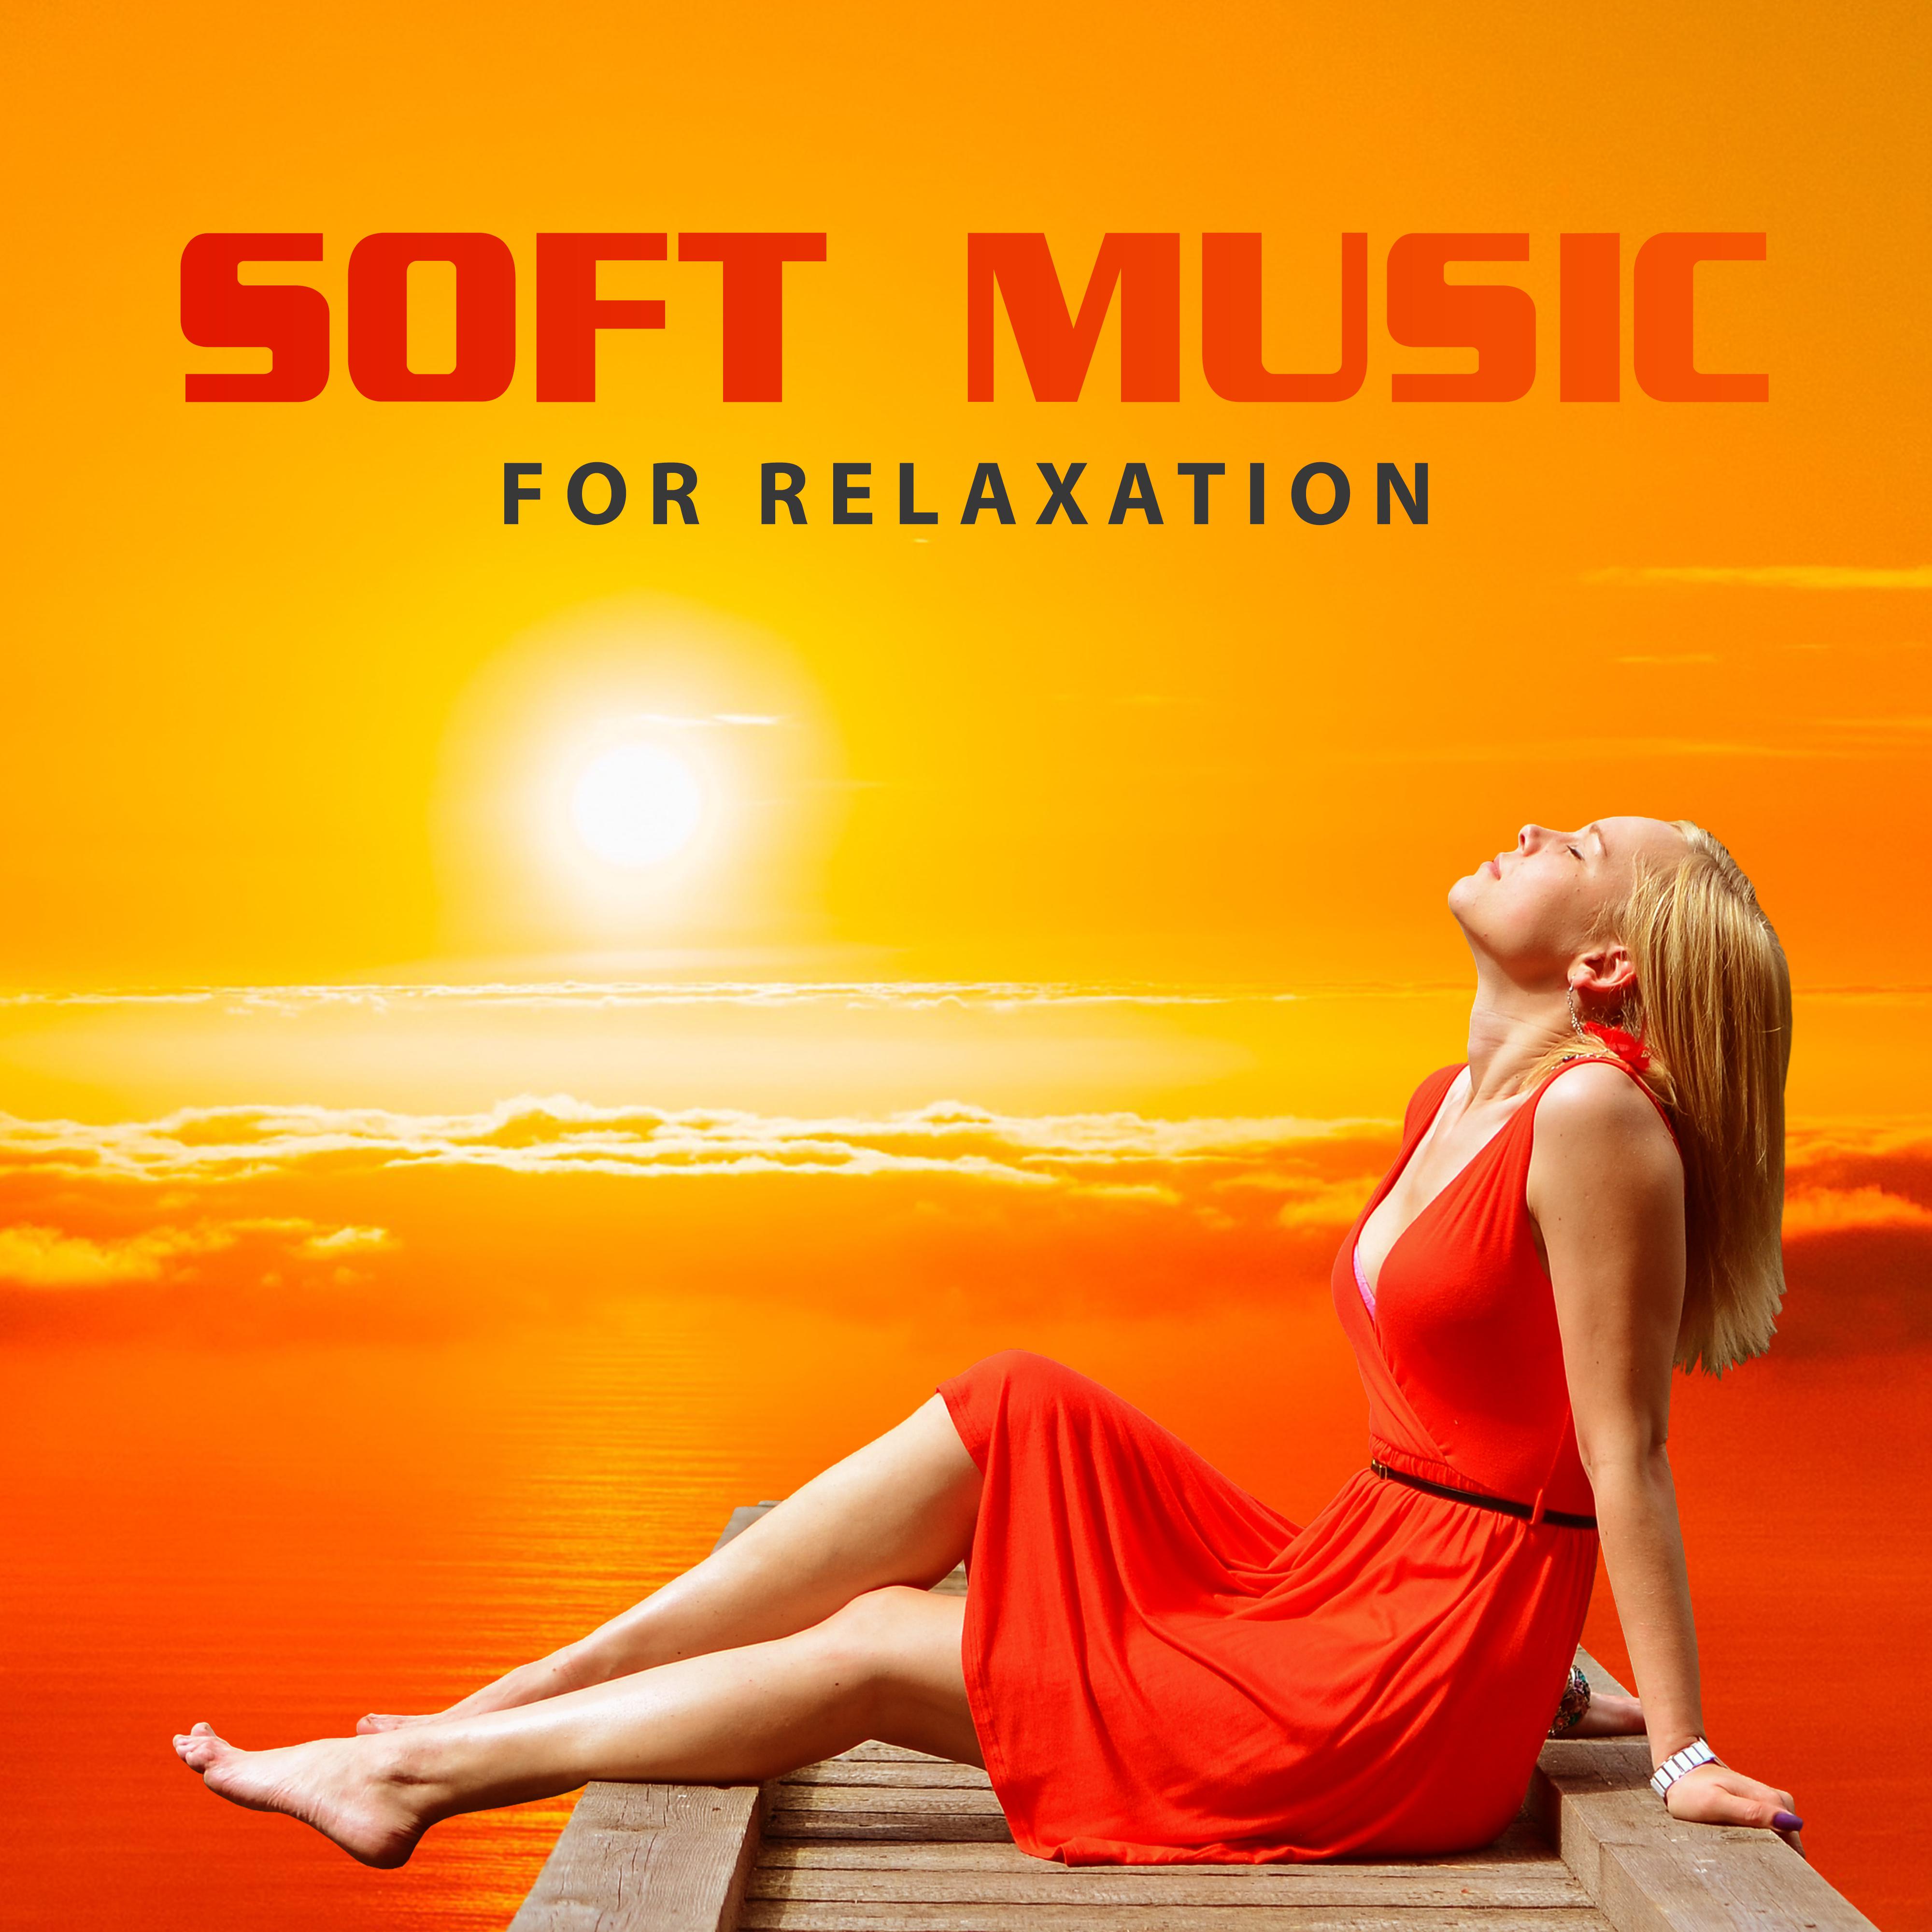 Soft Music for Relaxation  Stress Relief, Waves of Calmness, Inner Peace, New Age Music